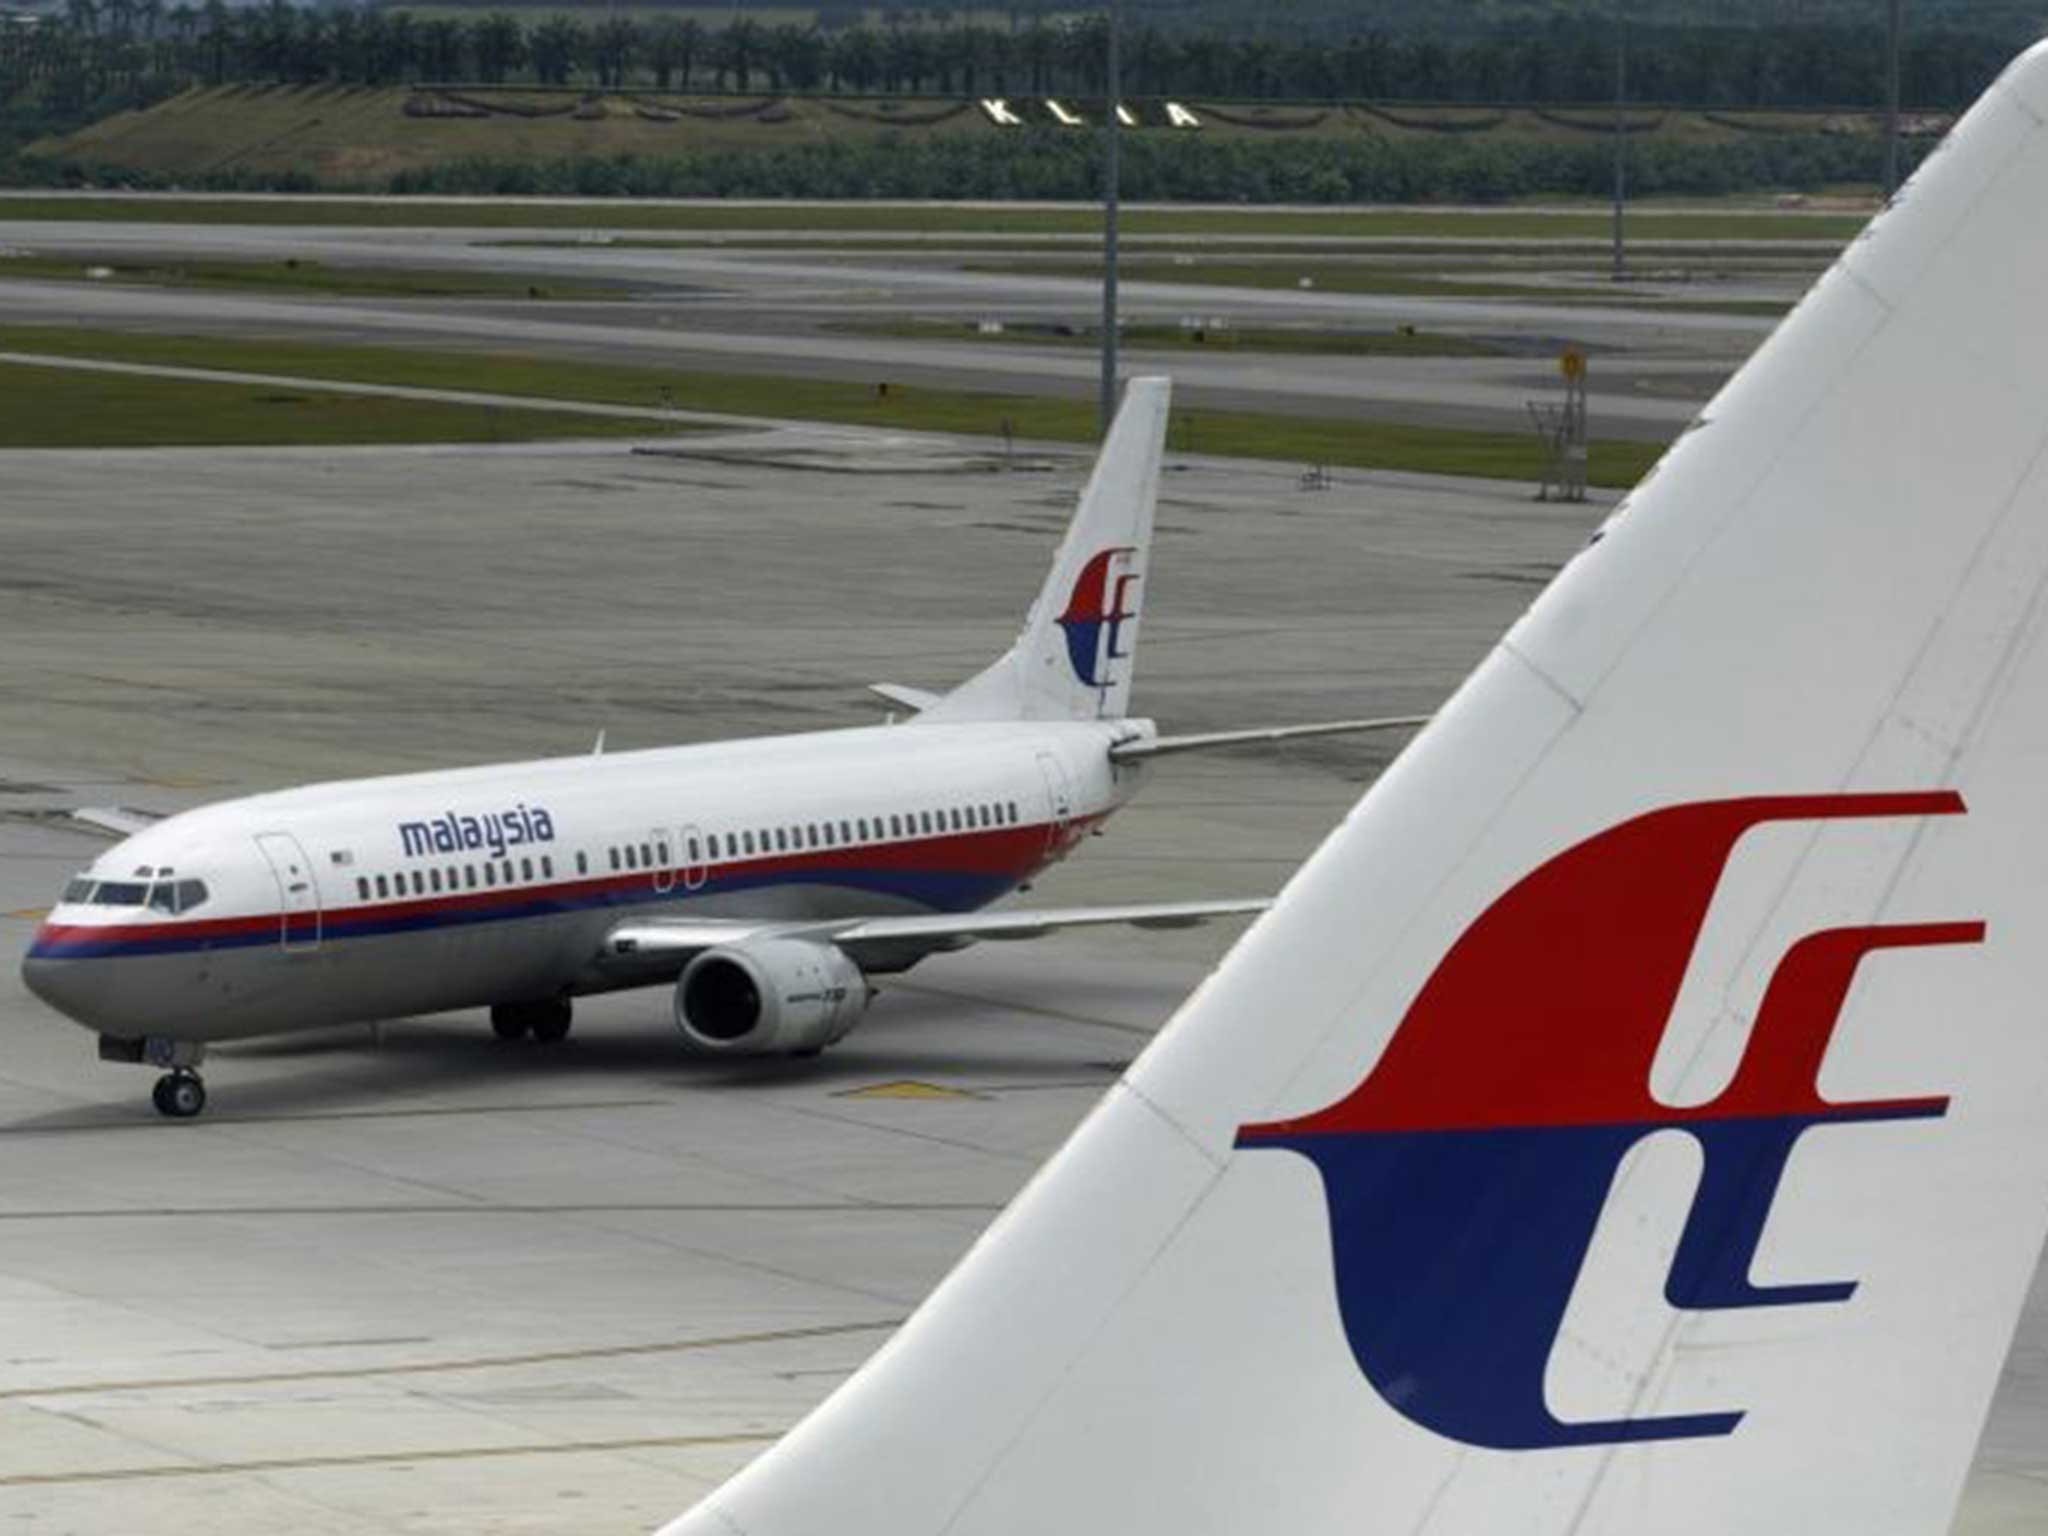 One of Malaysia Airlines carriers stands on the runway at Kuala Lumpar